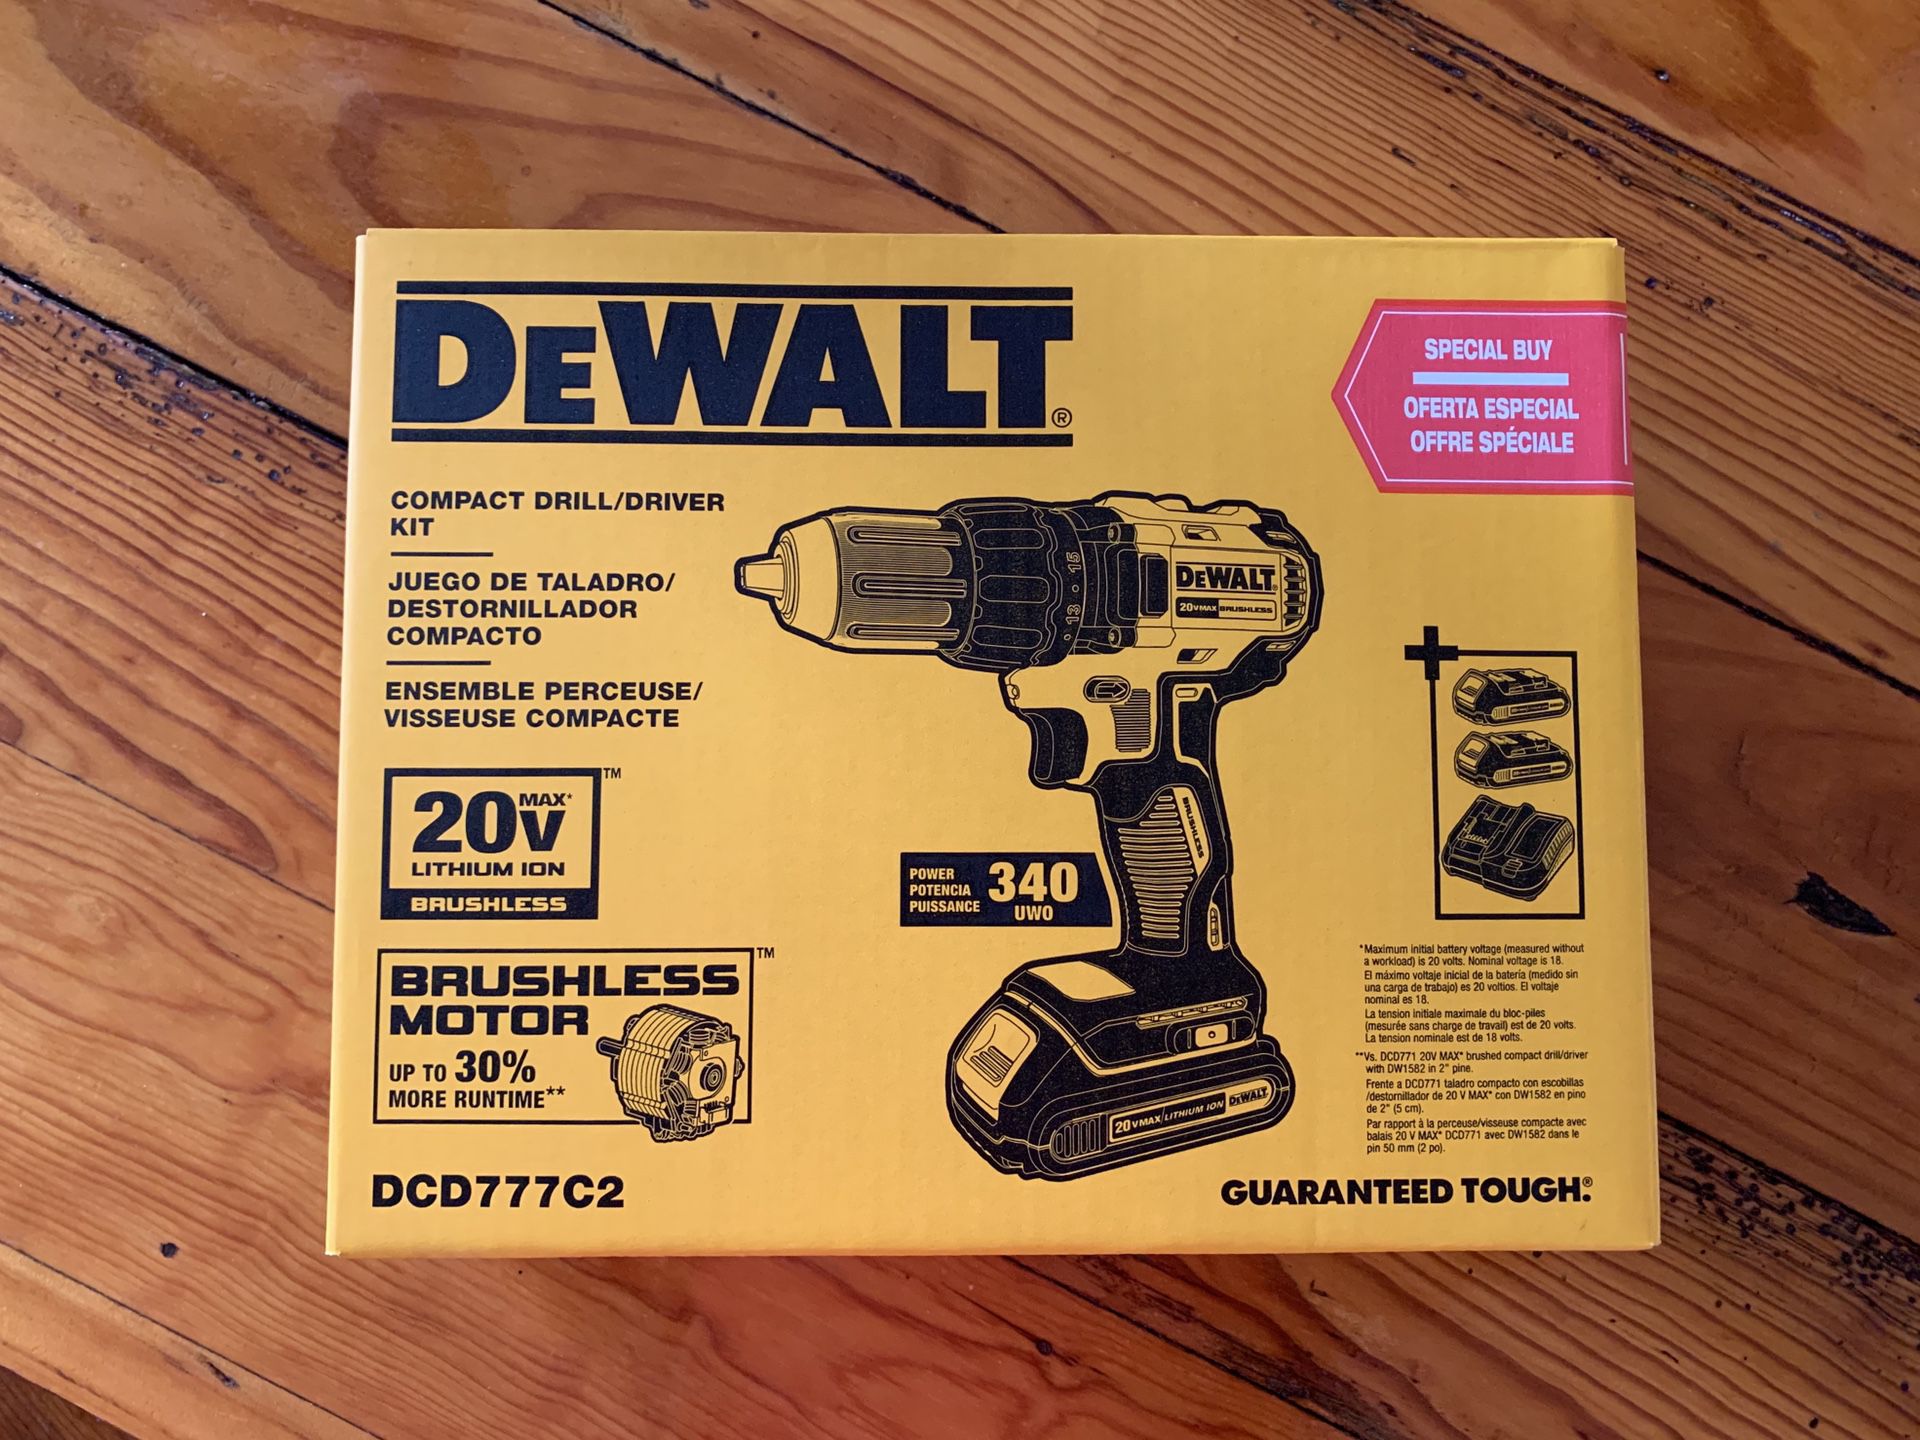 BRAND NEW IN BOX - DeWalt DCD777C2 20V Brushless Motor Compact Drill/Driver Kit - includes 2 batteries, charger & bag! 🛠